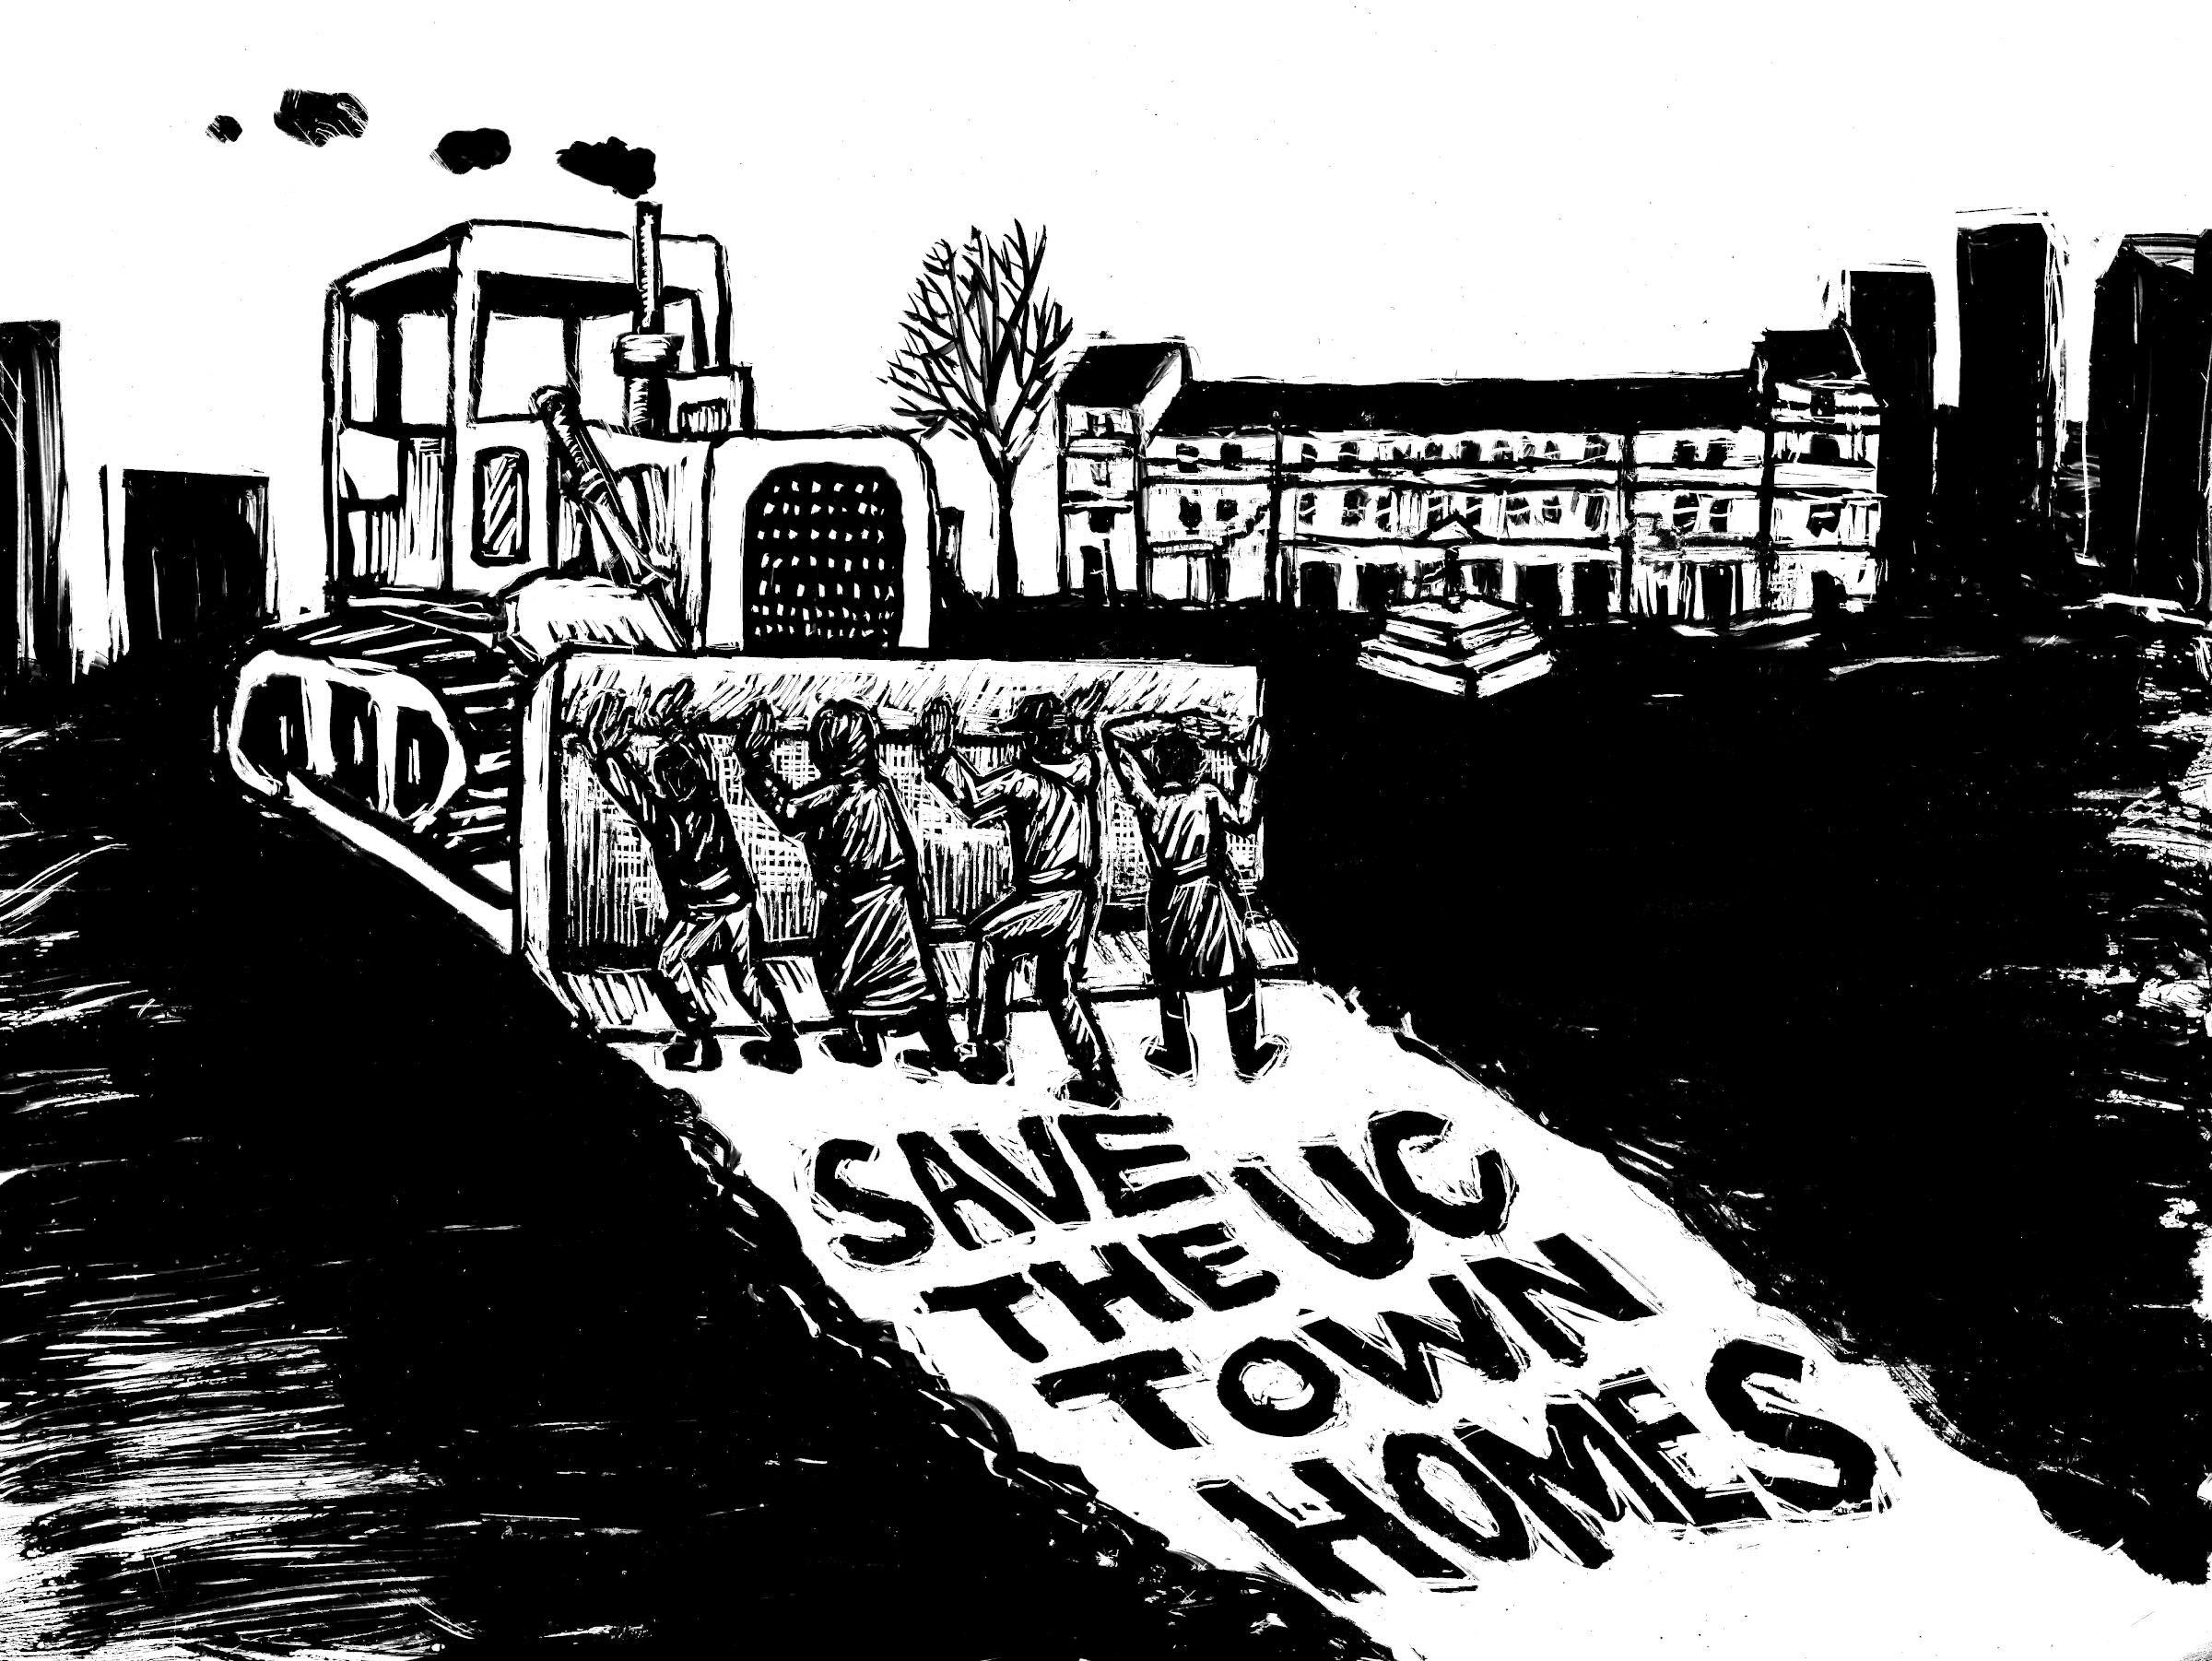 Block print of protesters blocking bulldozer from demolishing townhomes with text in the background Save the UC Townhomes